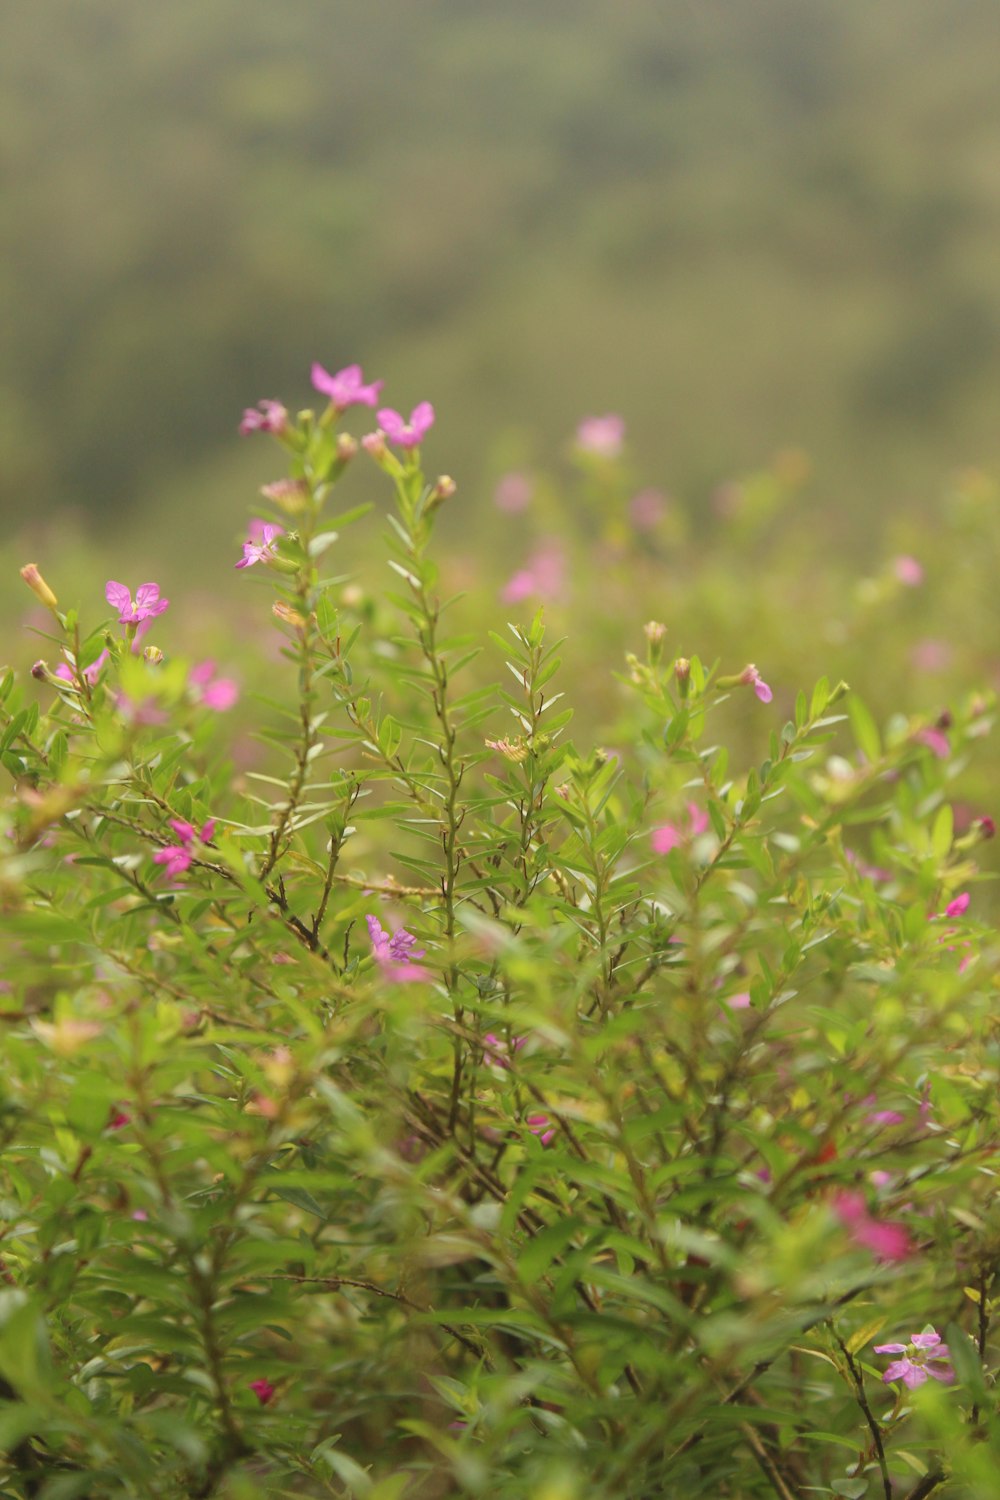 a bush with pink flowers in the foreground